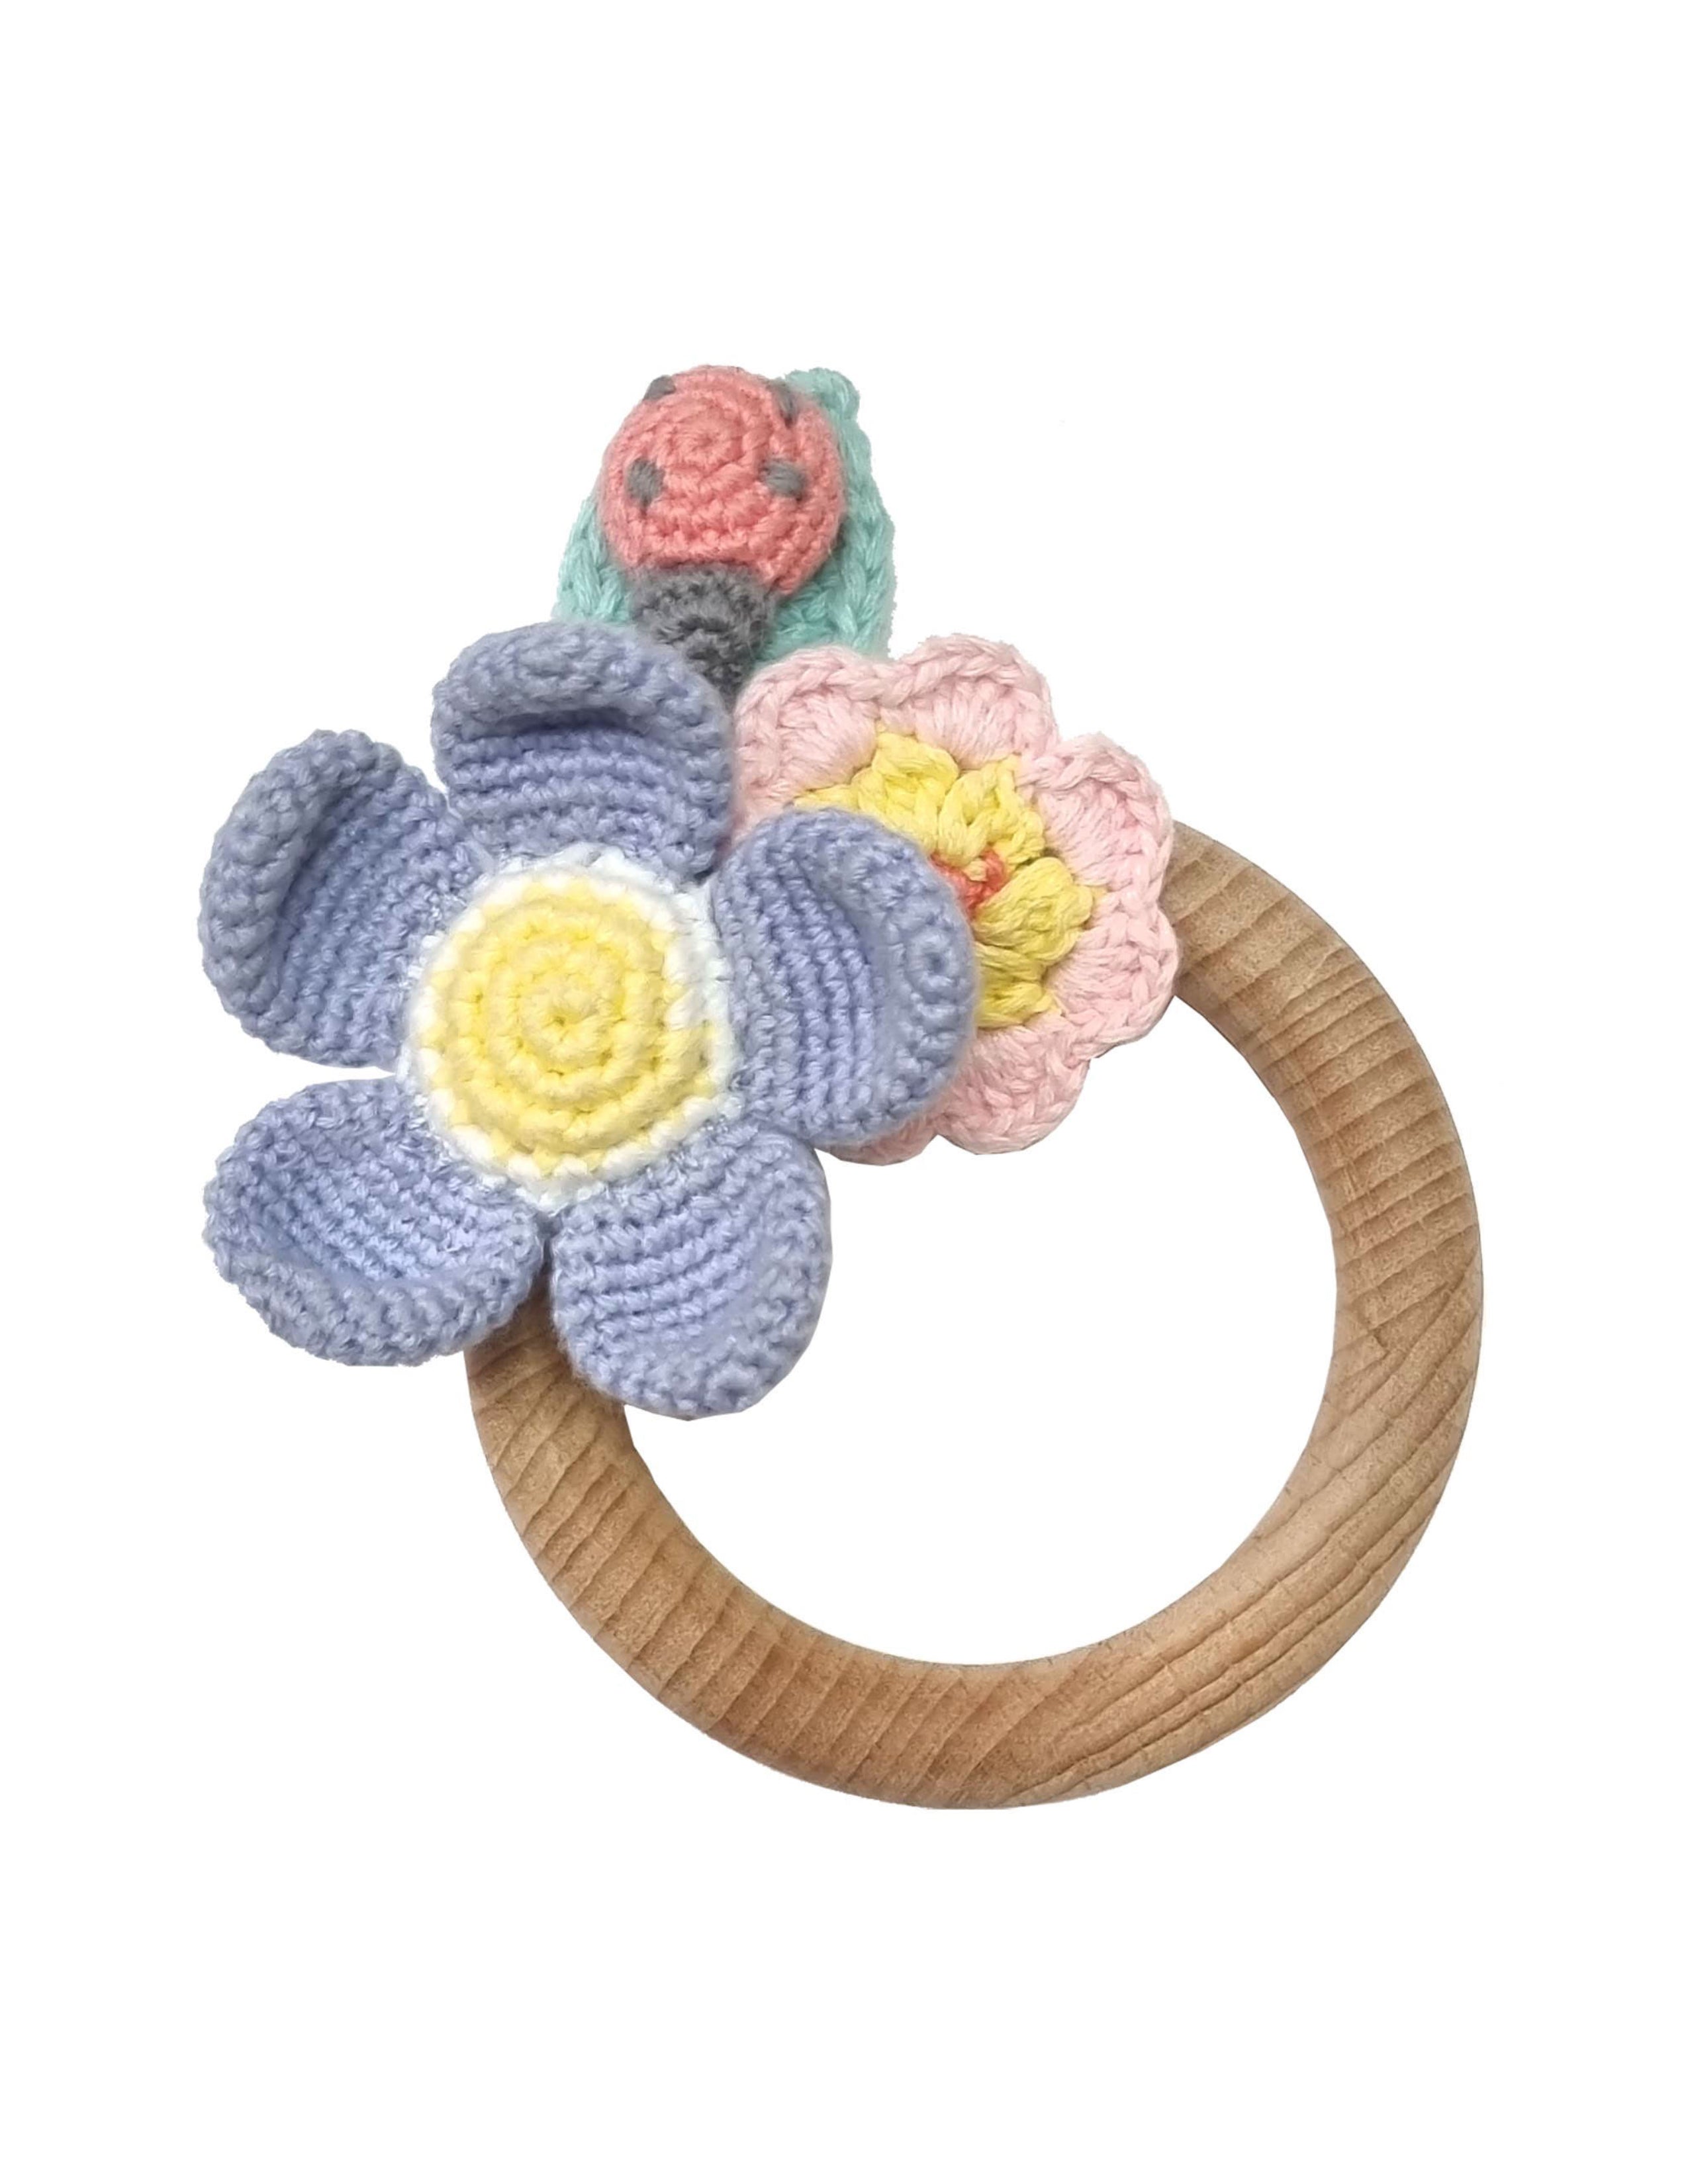 How To Make Pretty Crochet Flower Ring - DIY Tutorial - Guidecentral -  YouTube